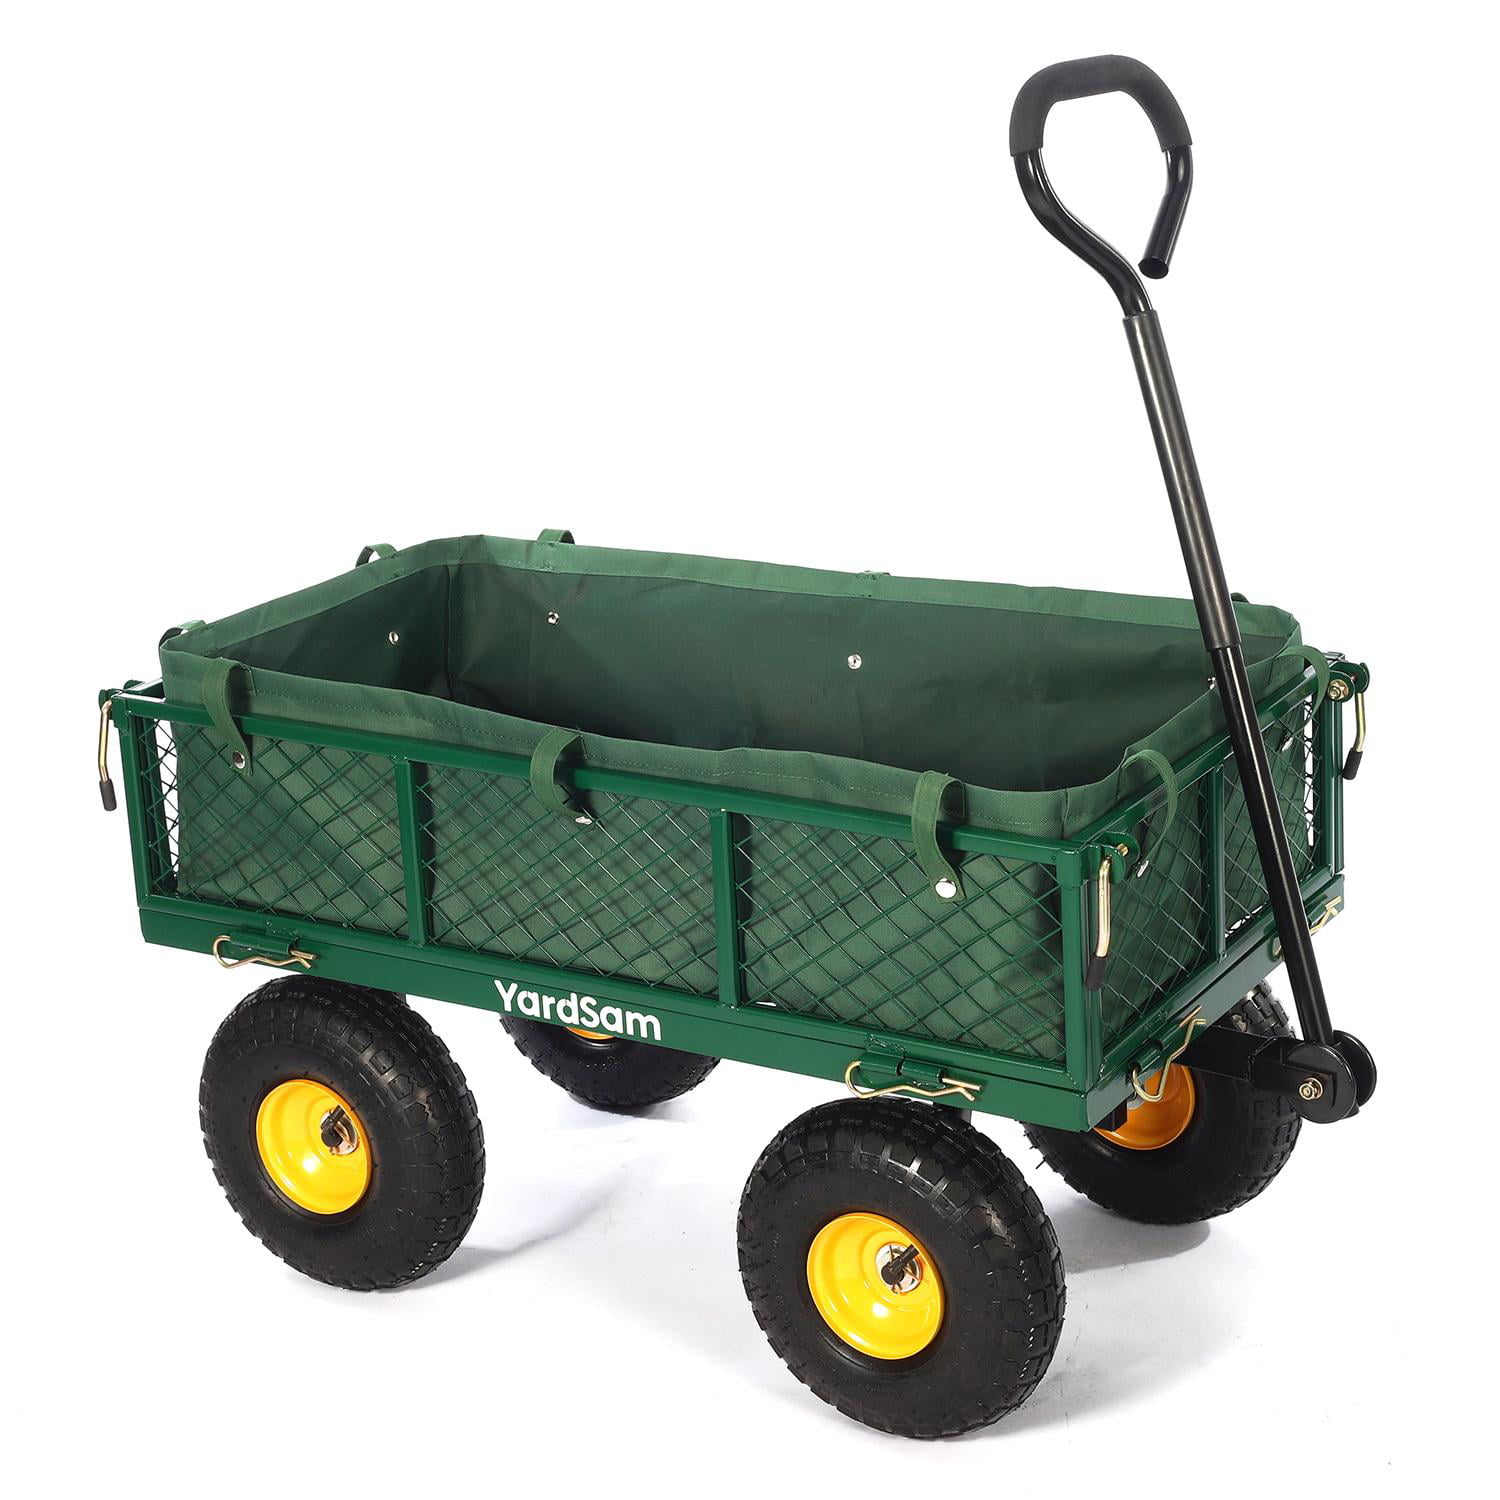 ZeHuoGe Green Cart Poly Pulling Wagon Garden Dump Cart Wagon Carrier 4 Rugged Wide-Track Air Tires with Heavy Duty Steel Frame & 10 Pneumatic Tires 300Lbs Capacity Green